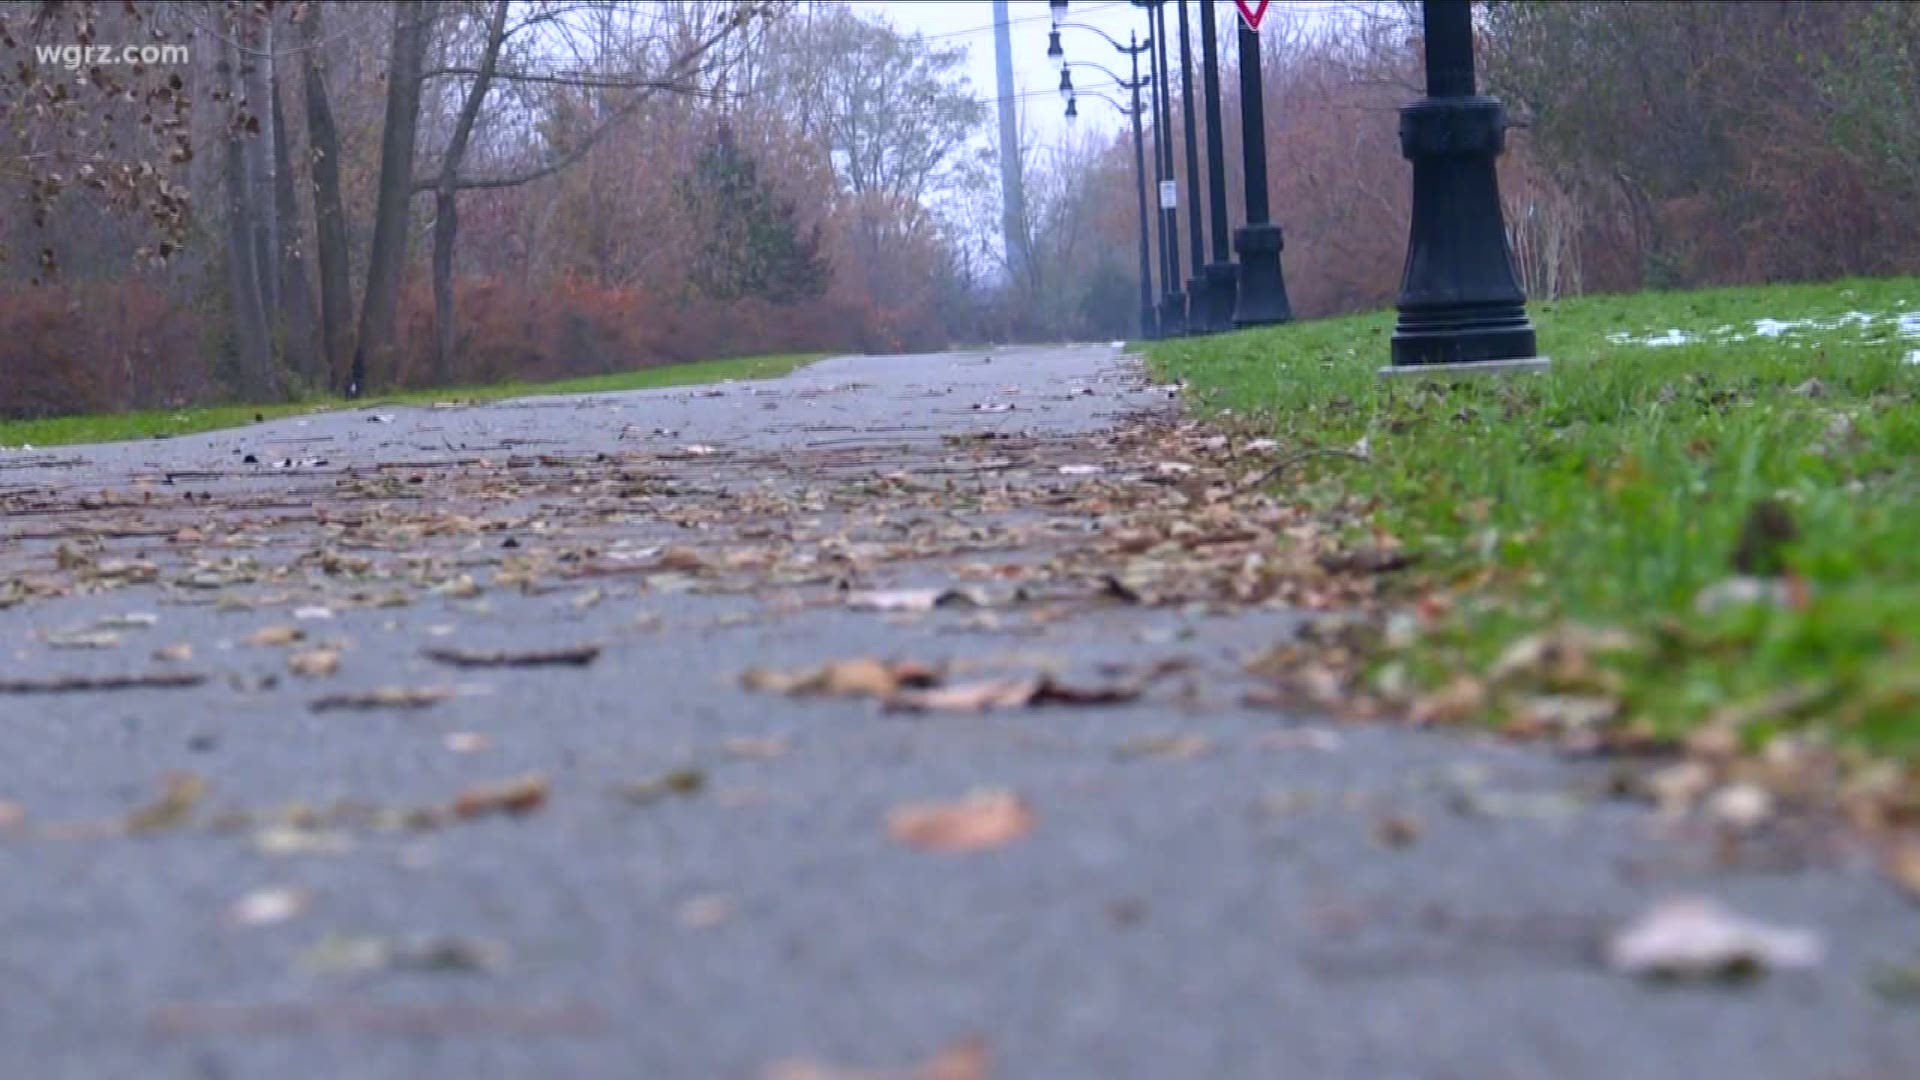 A new project in North Buffalo seeks to extend a trail that has already been established.